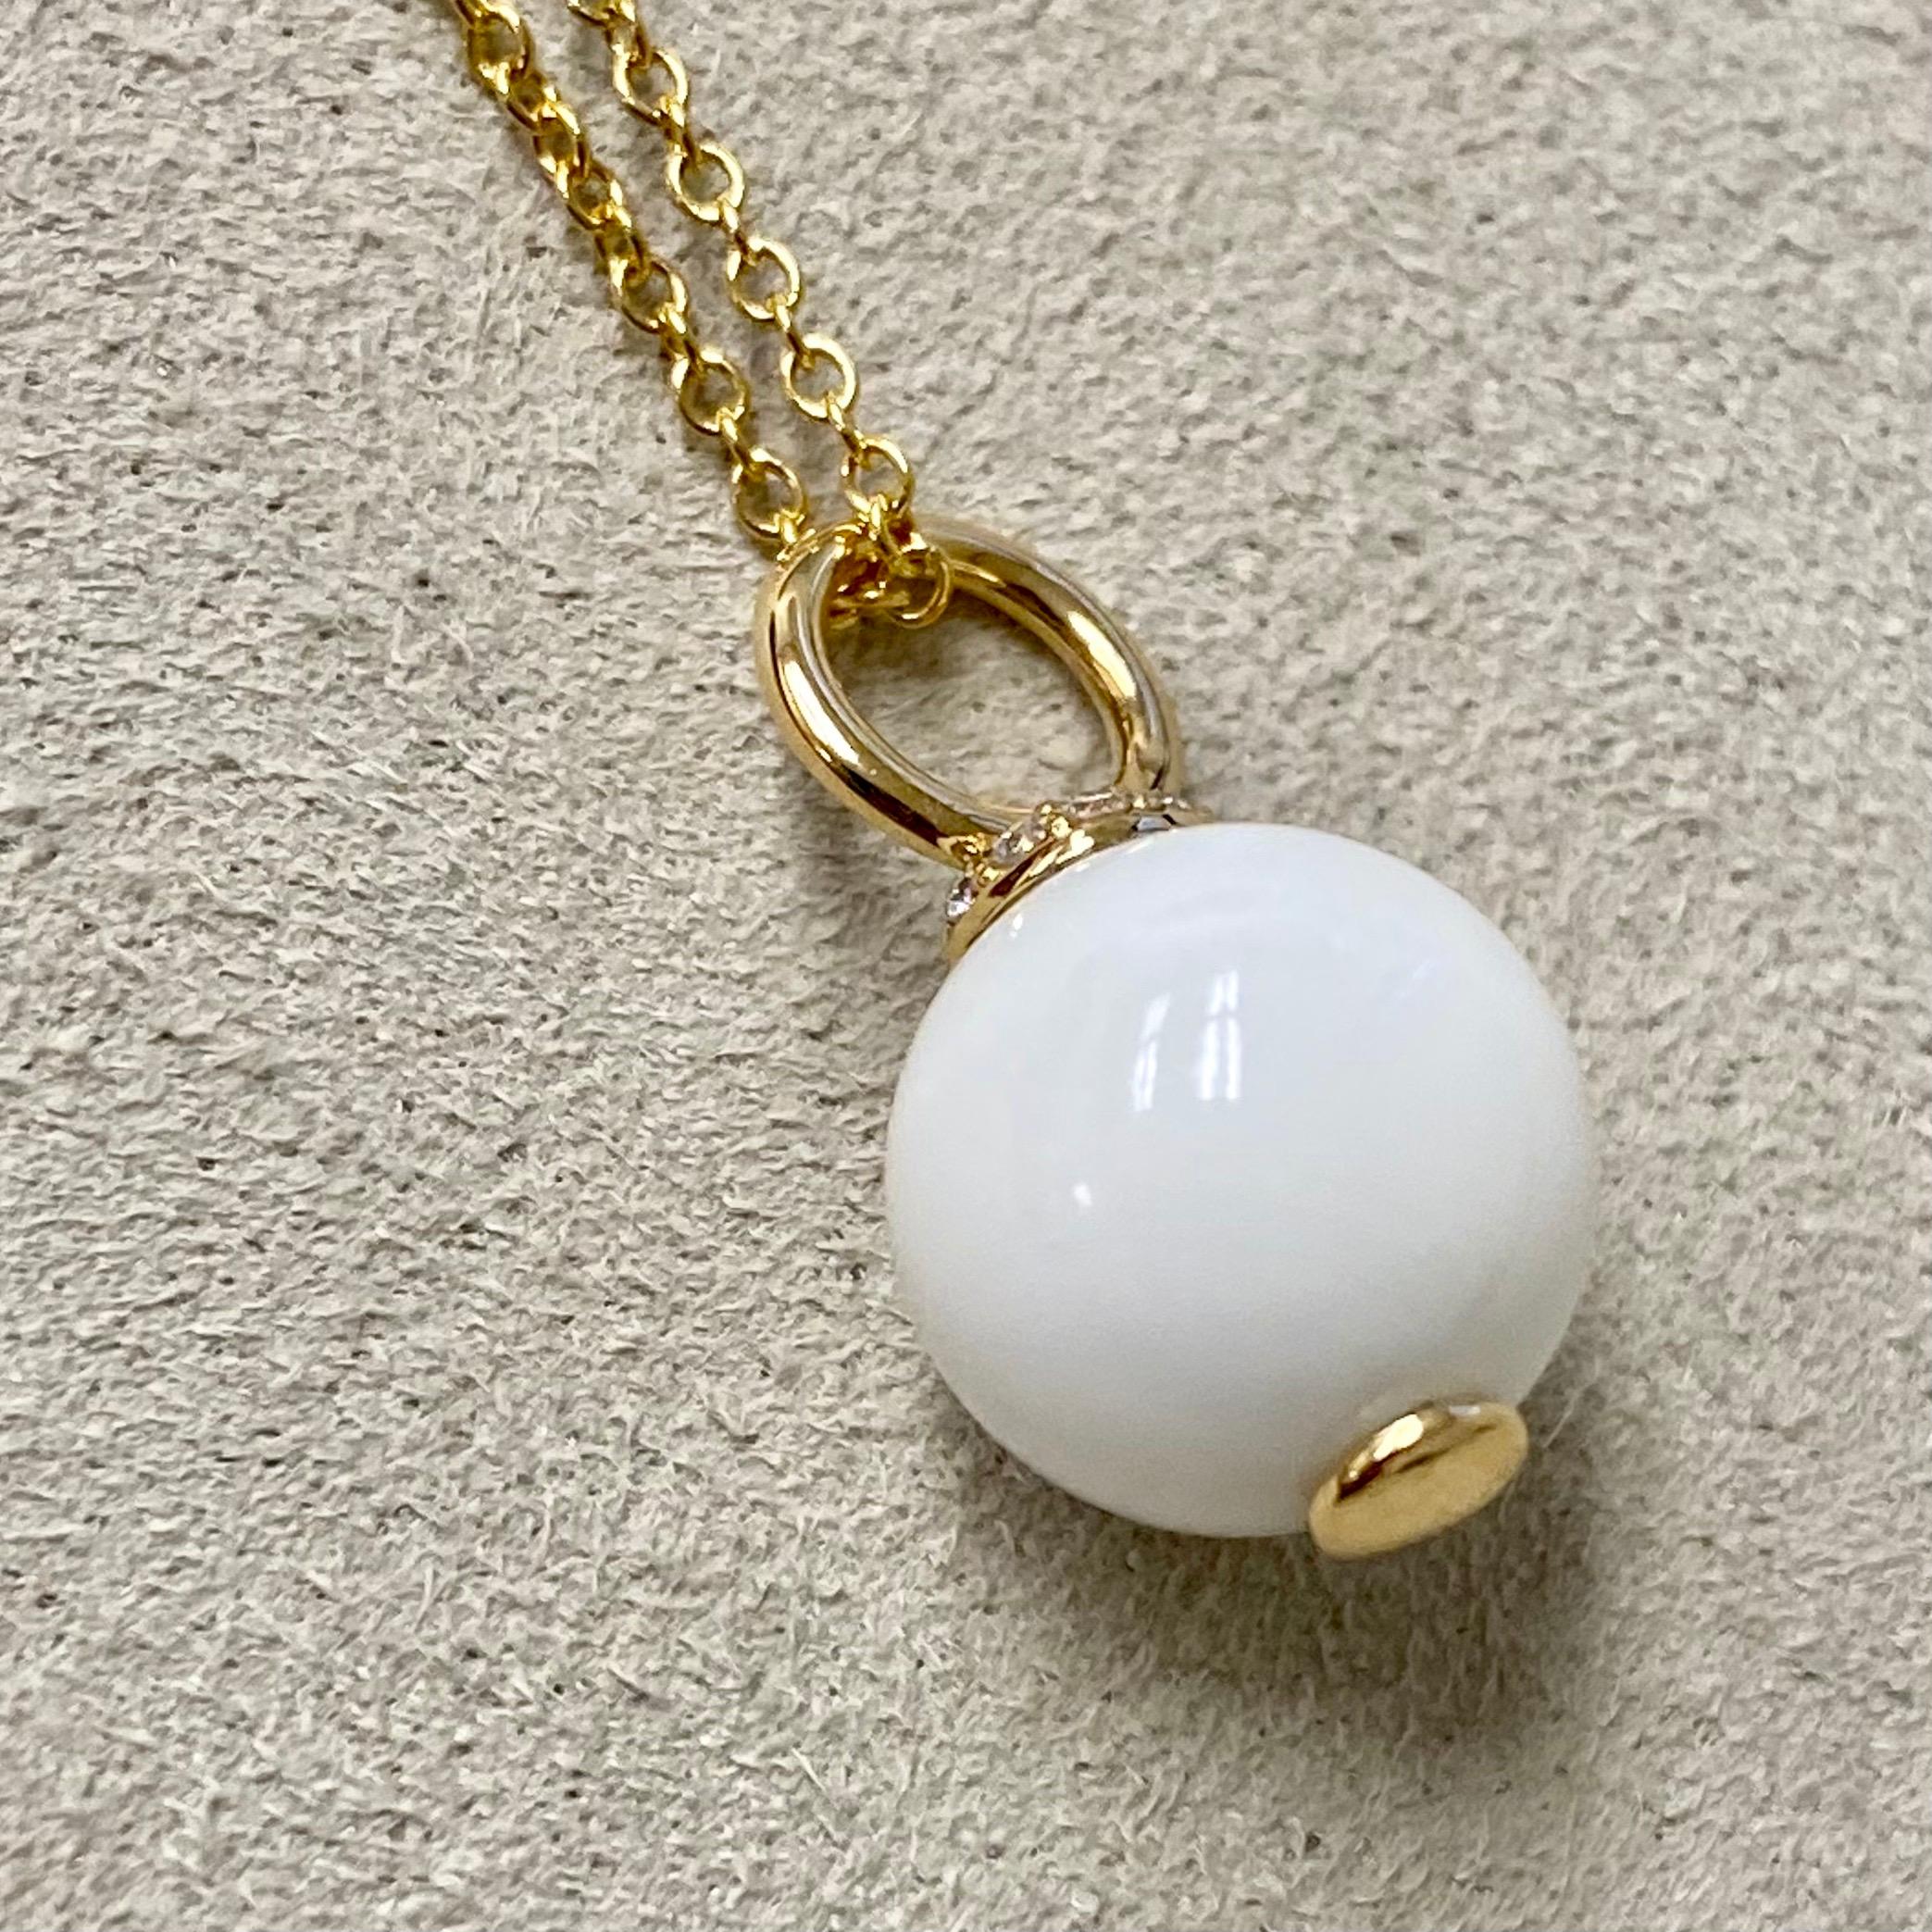 Created in 18 karat yellow gold
18 inch length
White Agate bead 8 carats approx.
Diamonds 0.05 carat approx.
18kyg lobster clasp
Limited edition

Exquisitely crafted in 18 karat yellow gold, this limited edition necklace boasts an intricate 18-inch